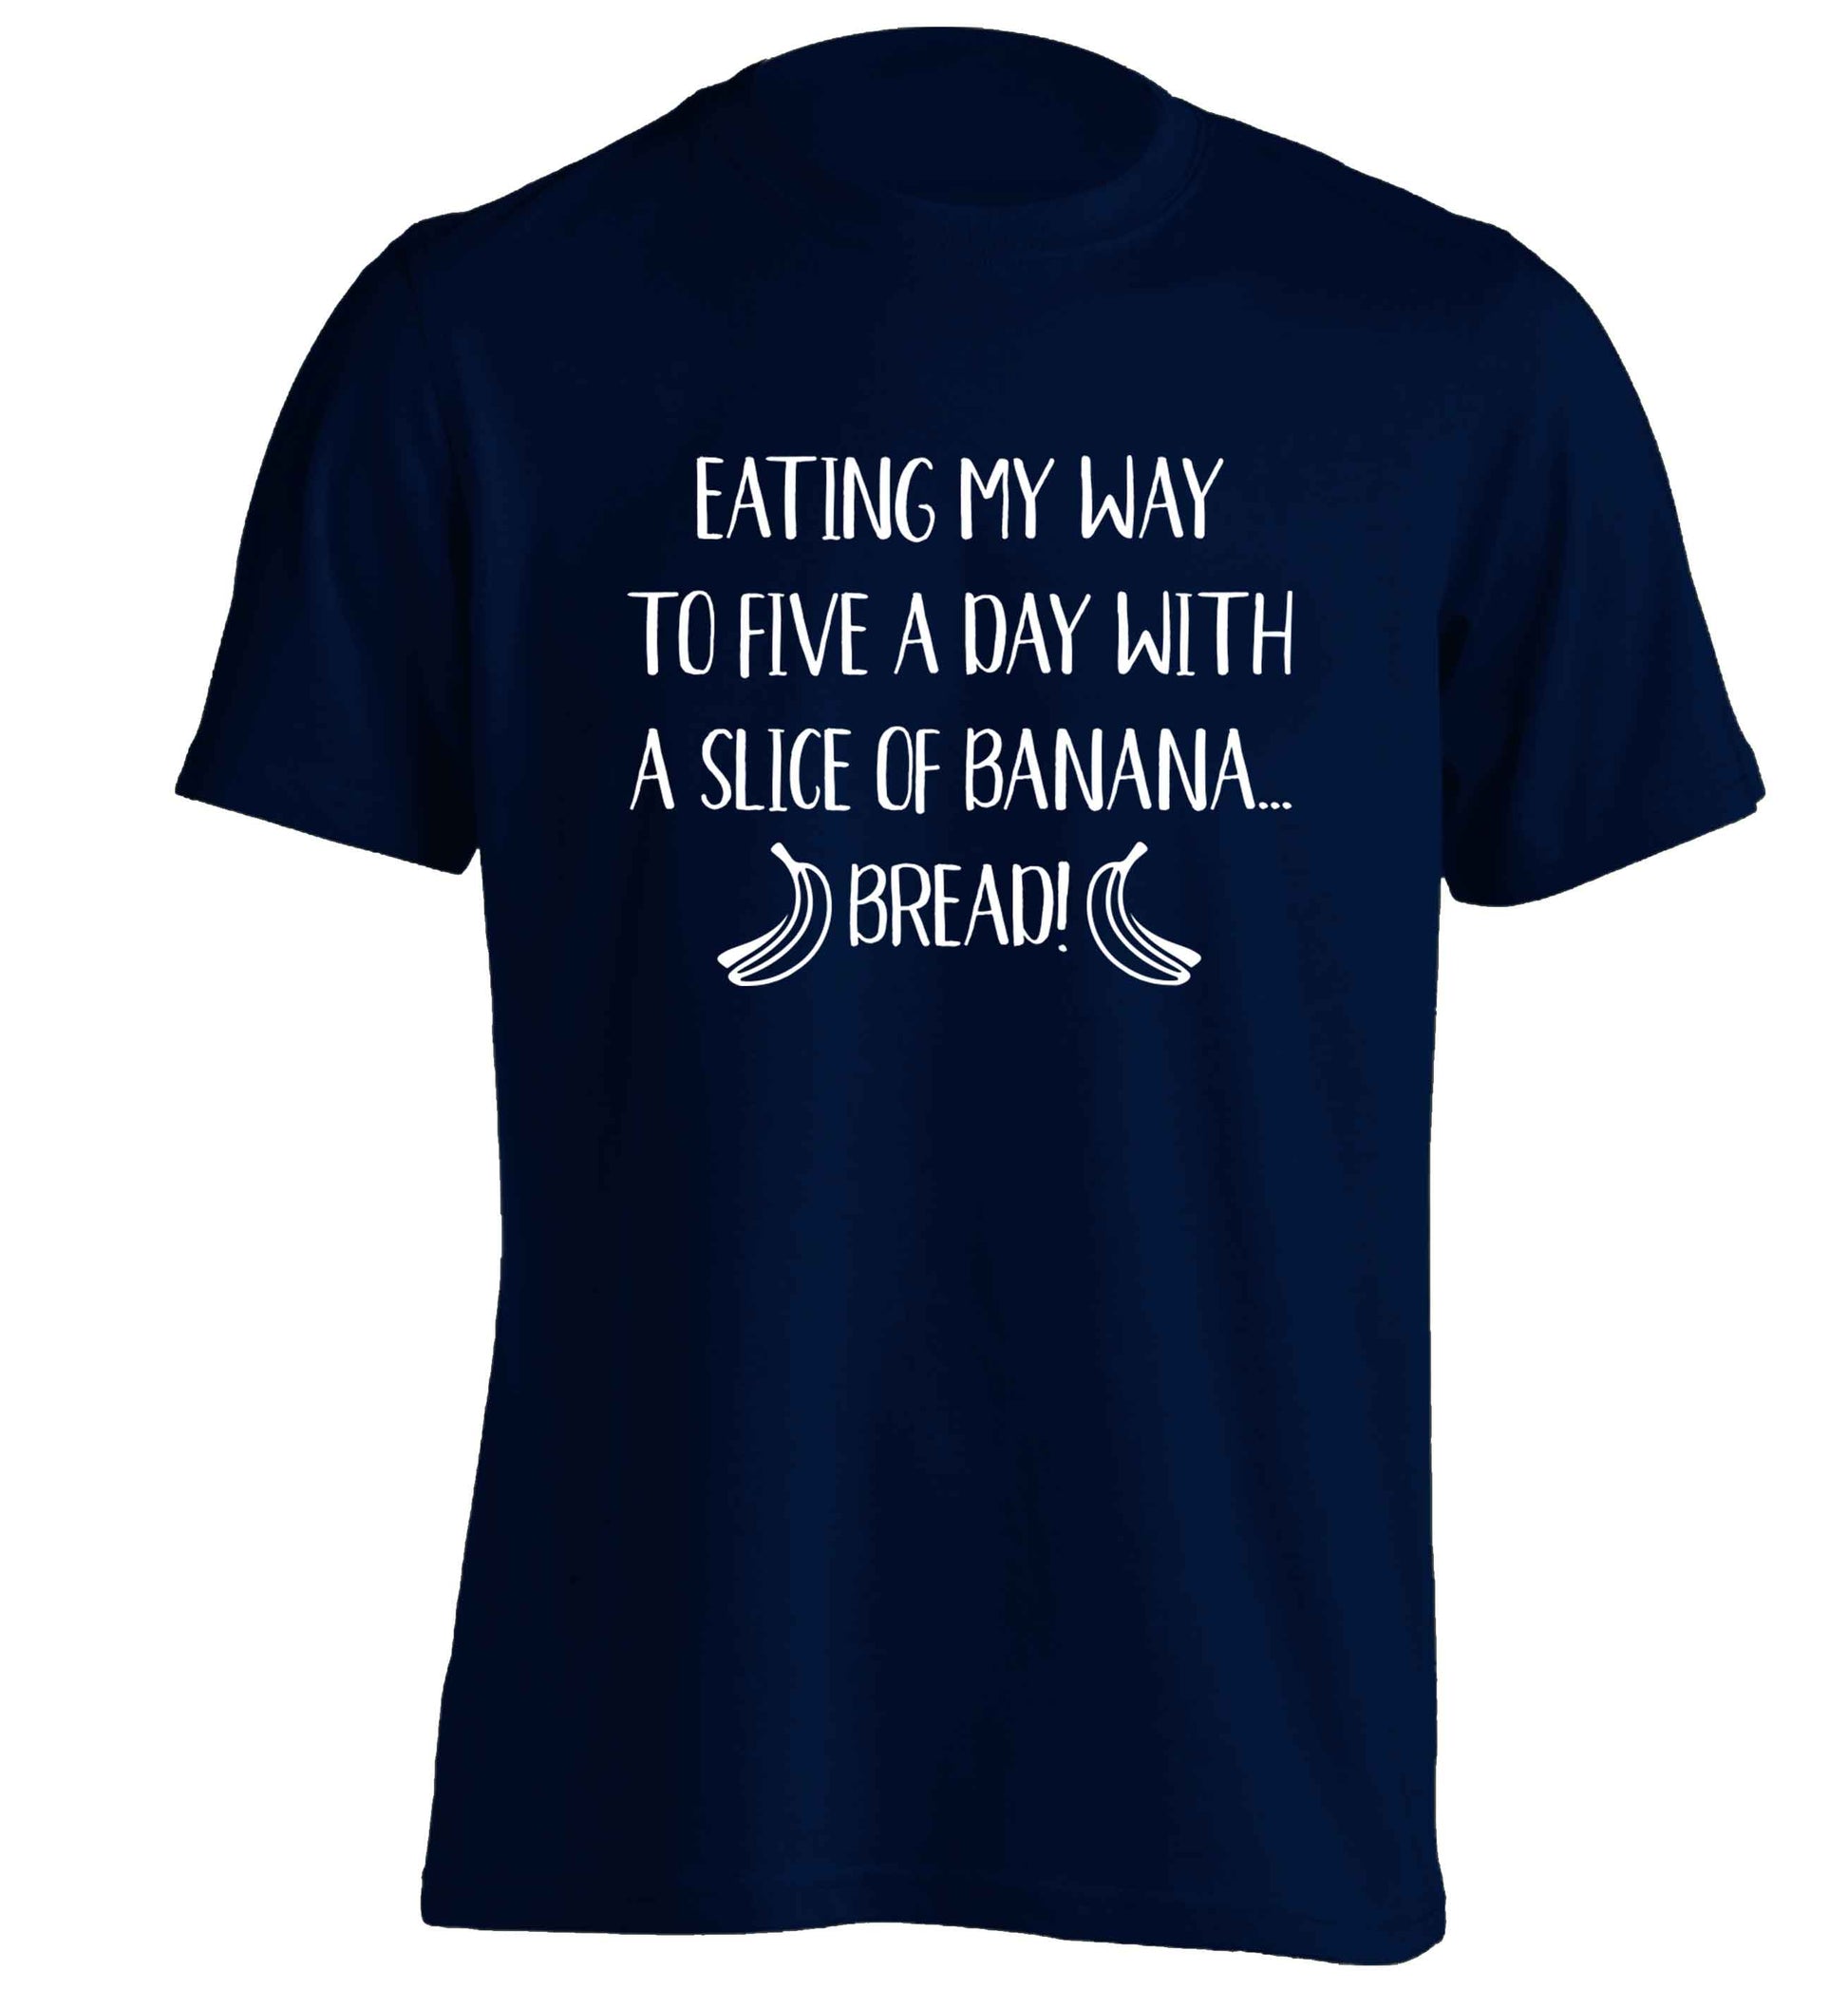 Eating my way to five a day with a slice of banana bread adults unisex navy Tshirt 2XL